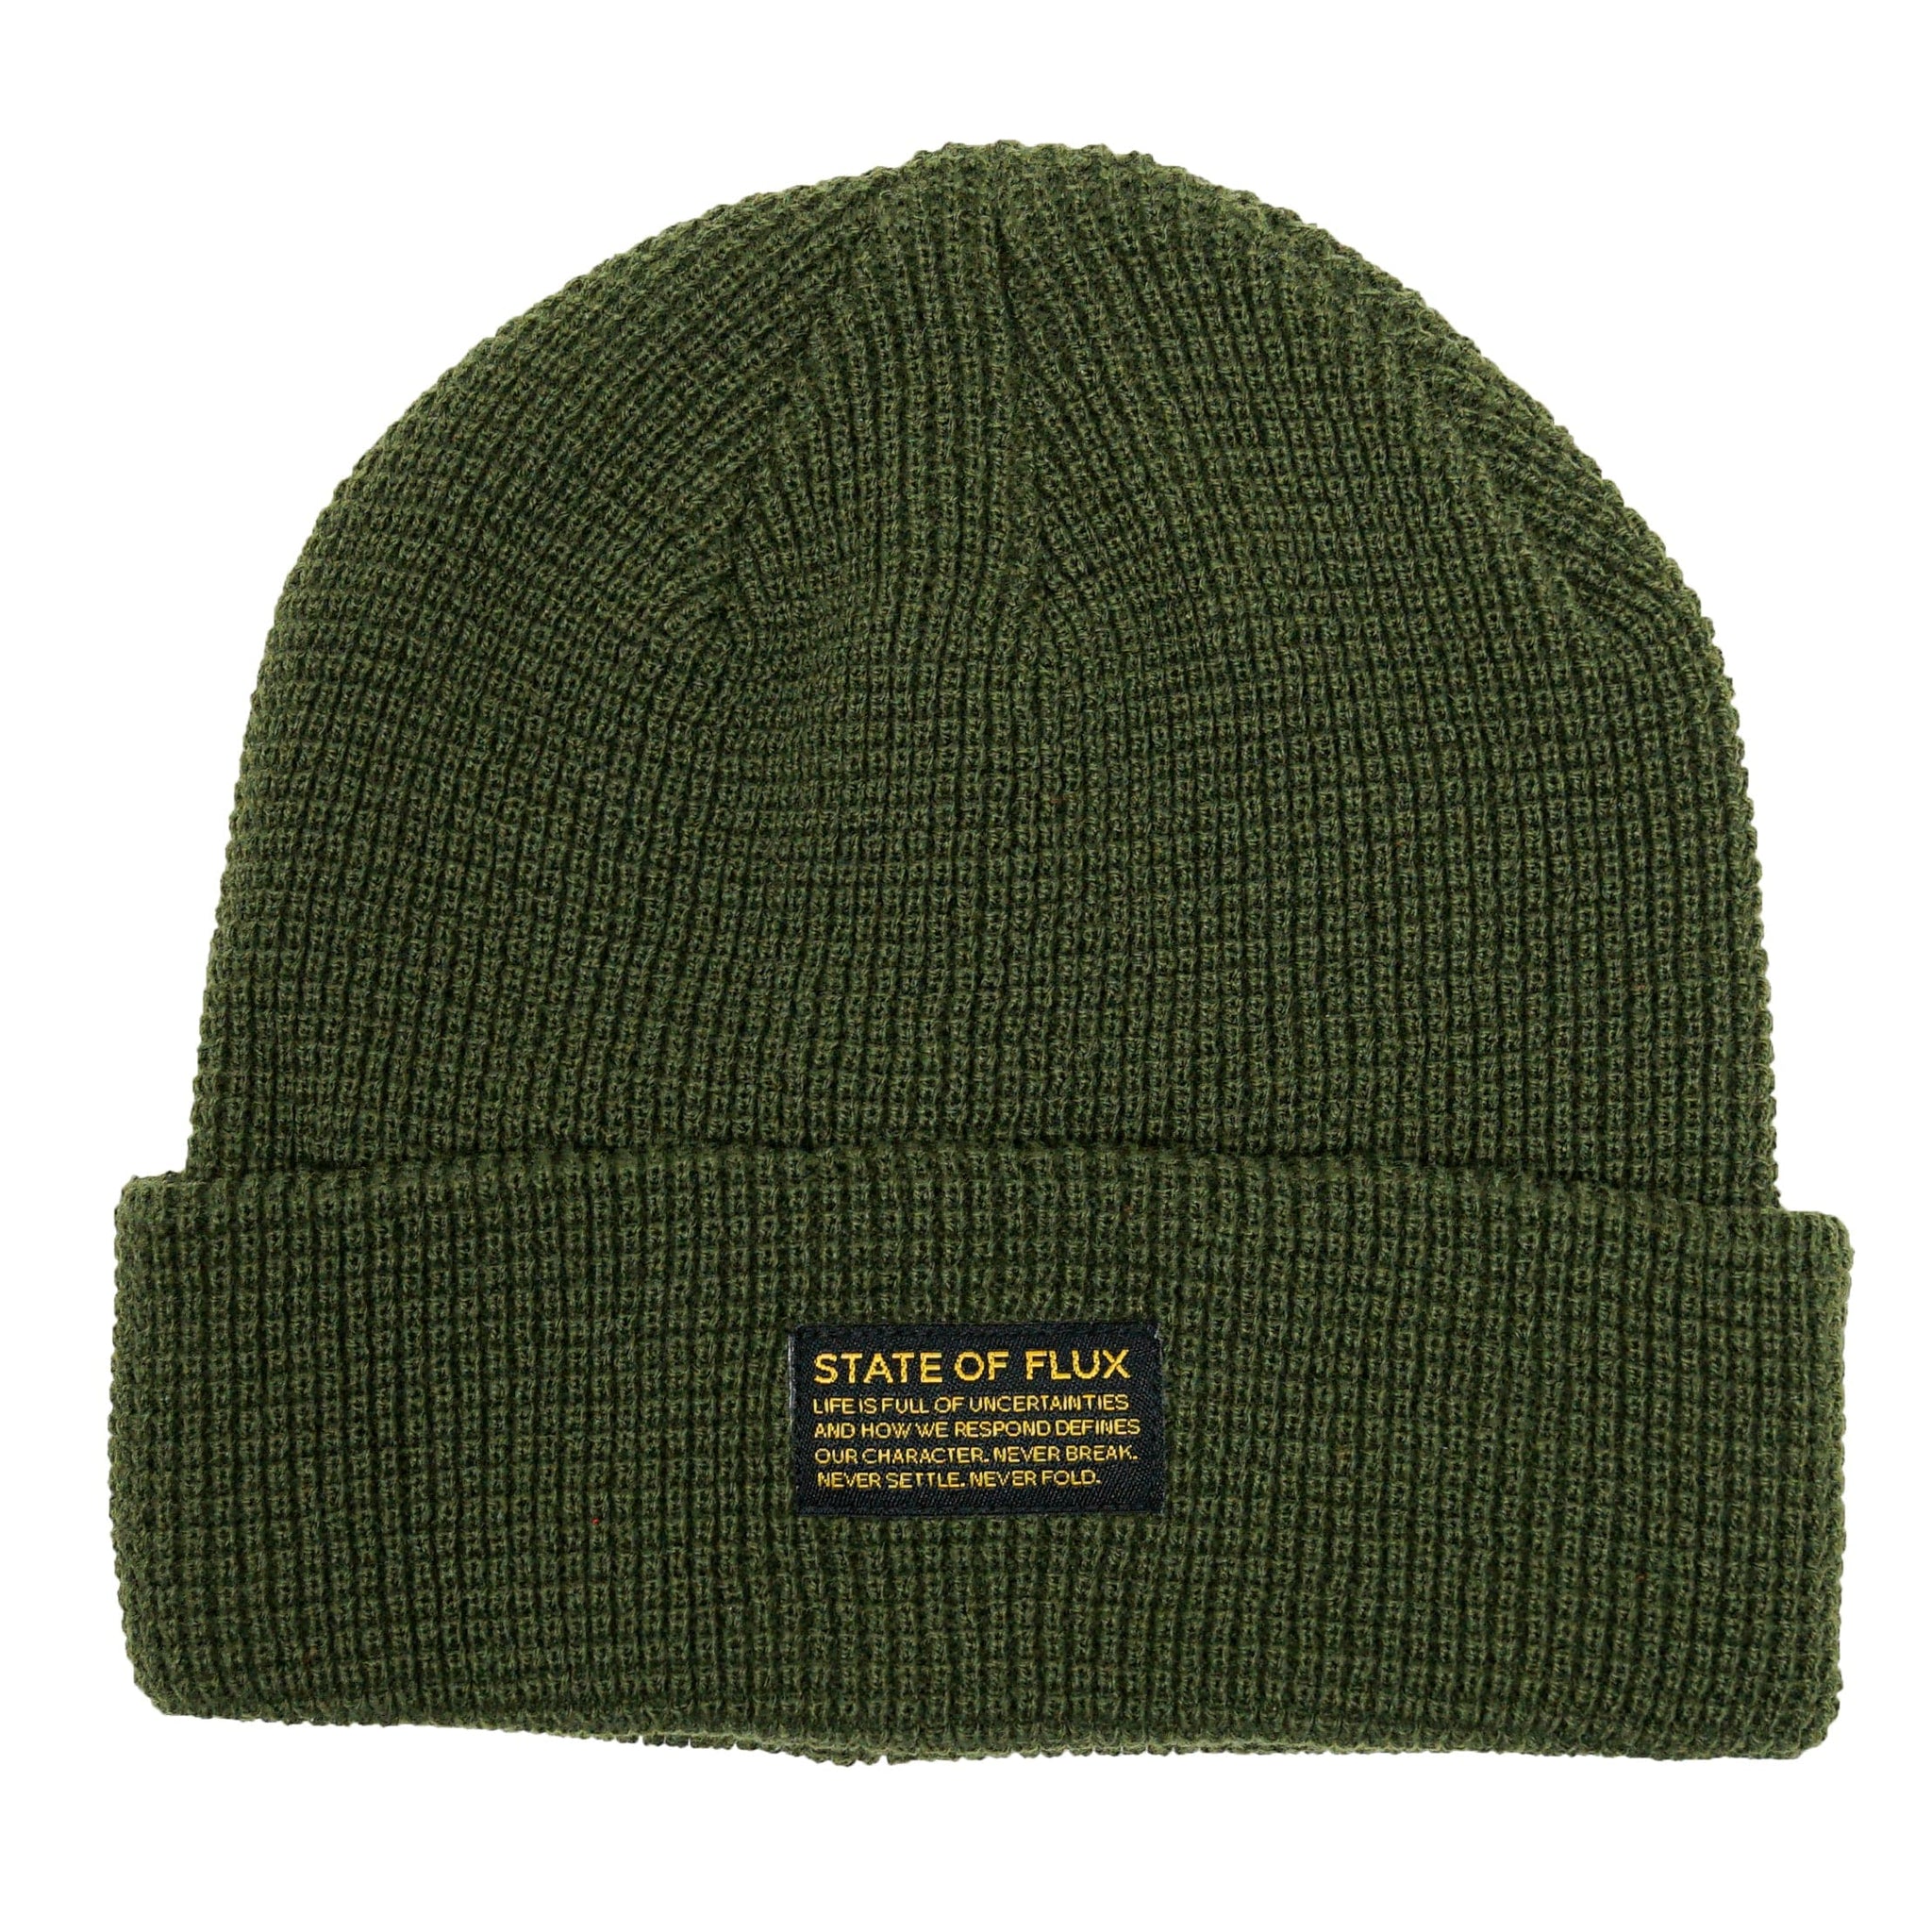 Waffle Knit Mantra Beanie in olive